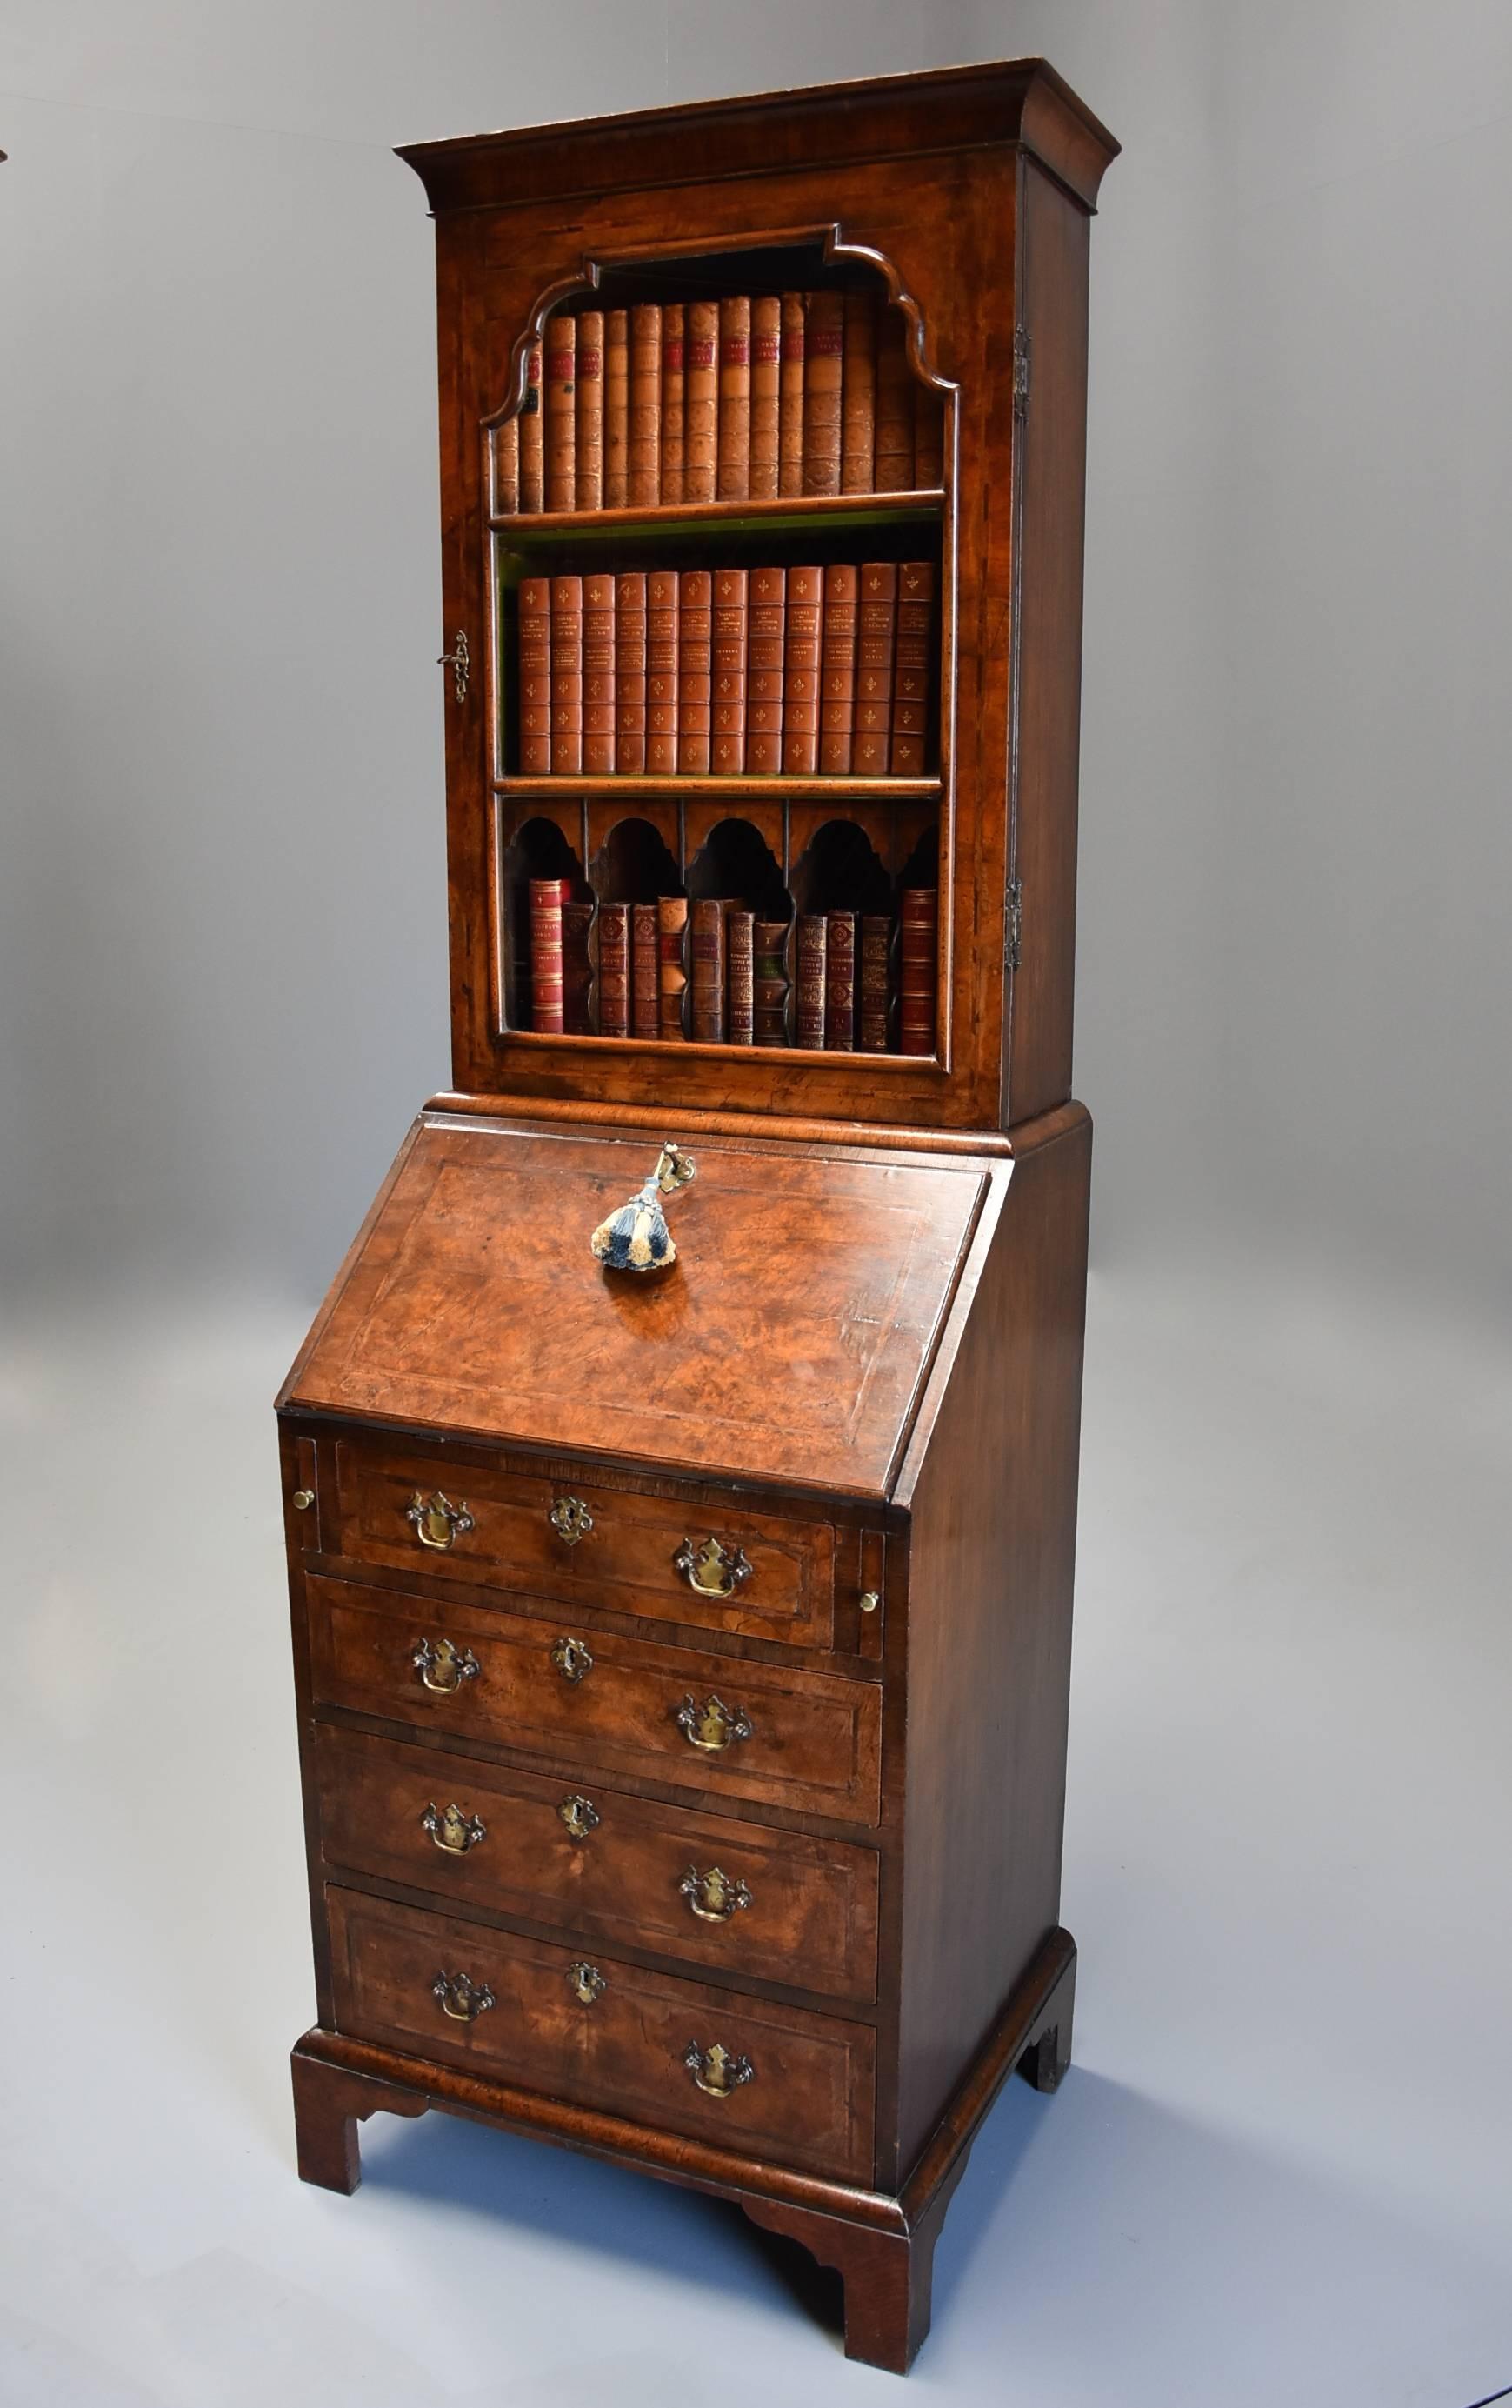 An early 20th century fine quality Queen Anne style walnut bureau bookcase of small proportions and superb patina (colour).

This bureau bookcase consists of a cross grain moulded cornice leading down to a glazed door with key with a shaped